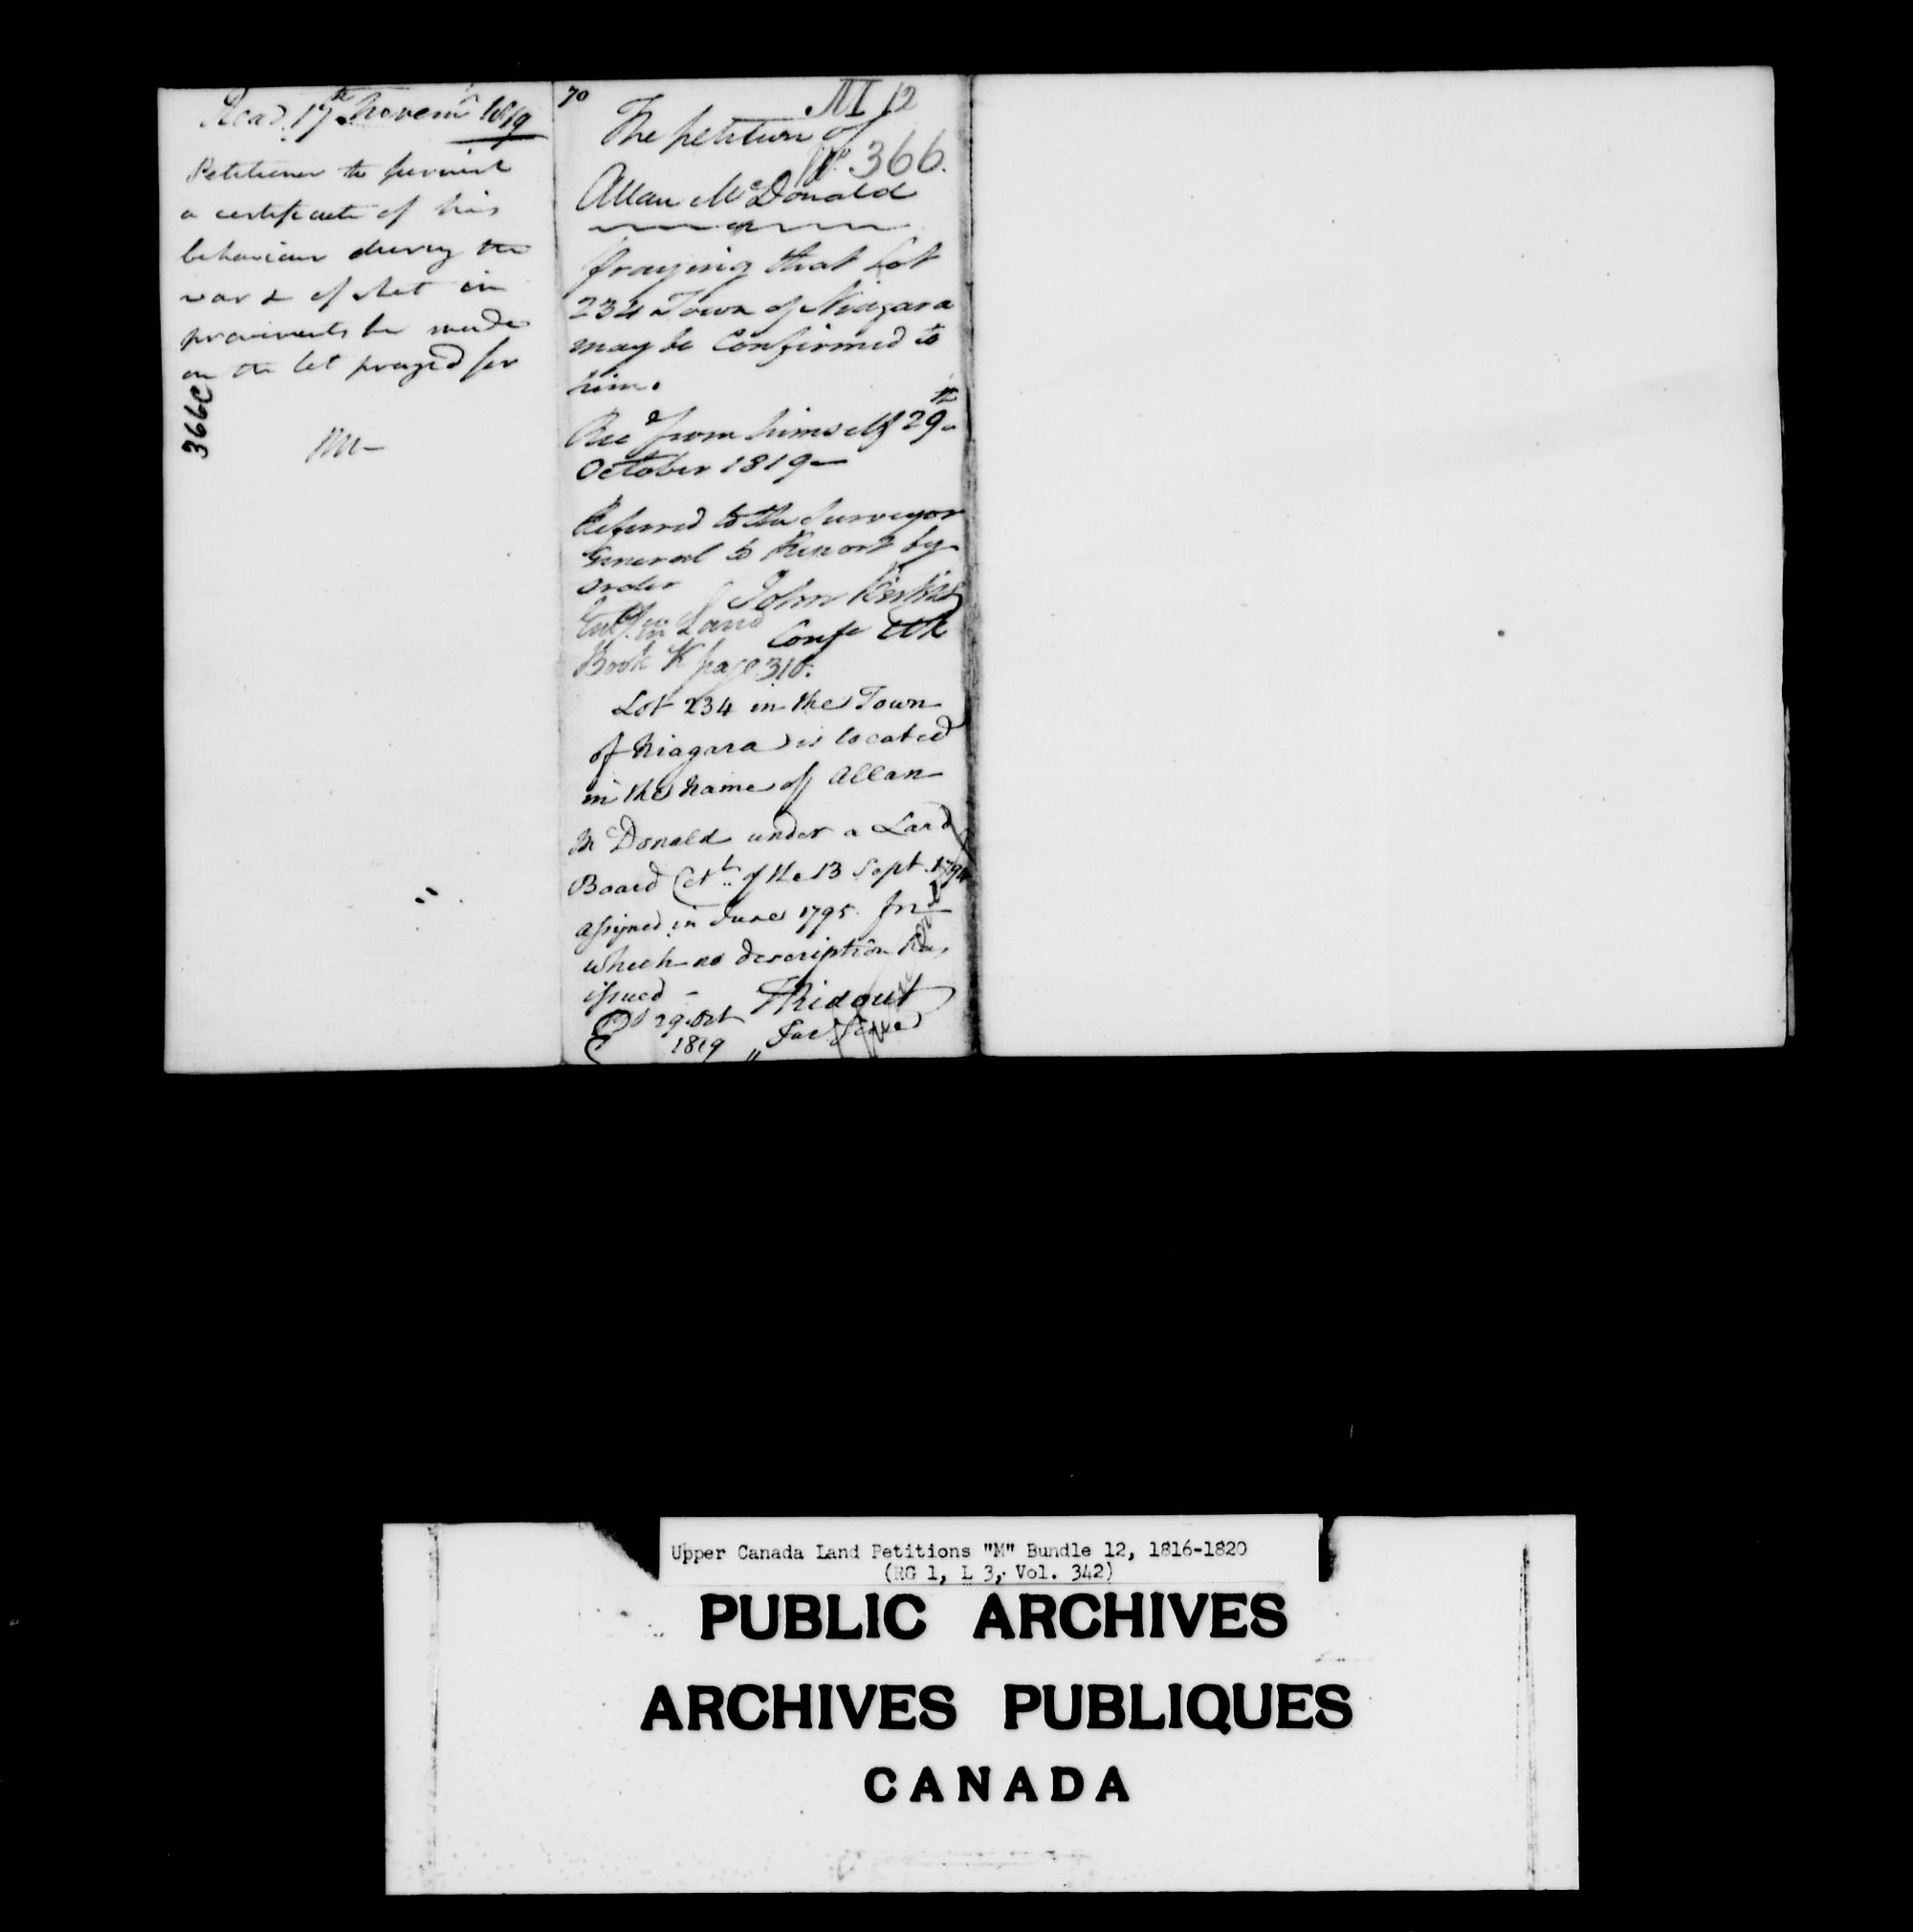 Title: Upper Canada Land Petitions (1763-1865) - Mikan Number: 205131 - Microform: c-2202